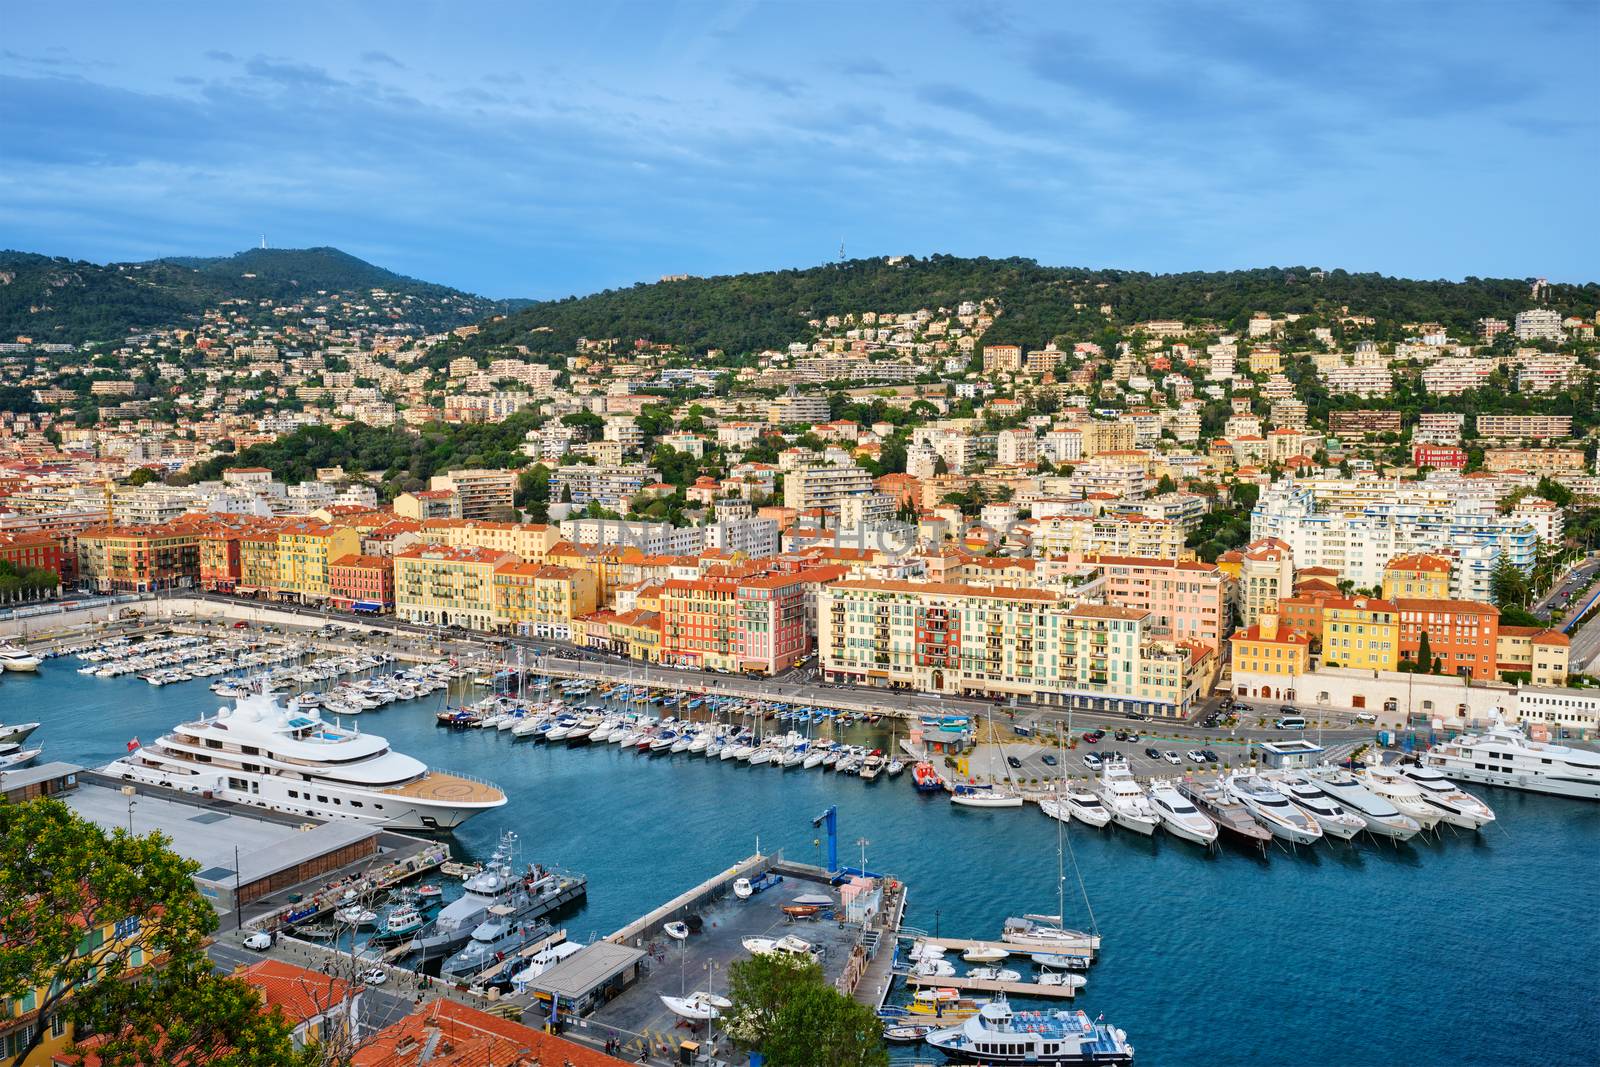 View of Old Port of Nice with yachts, France by dimol